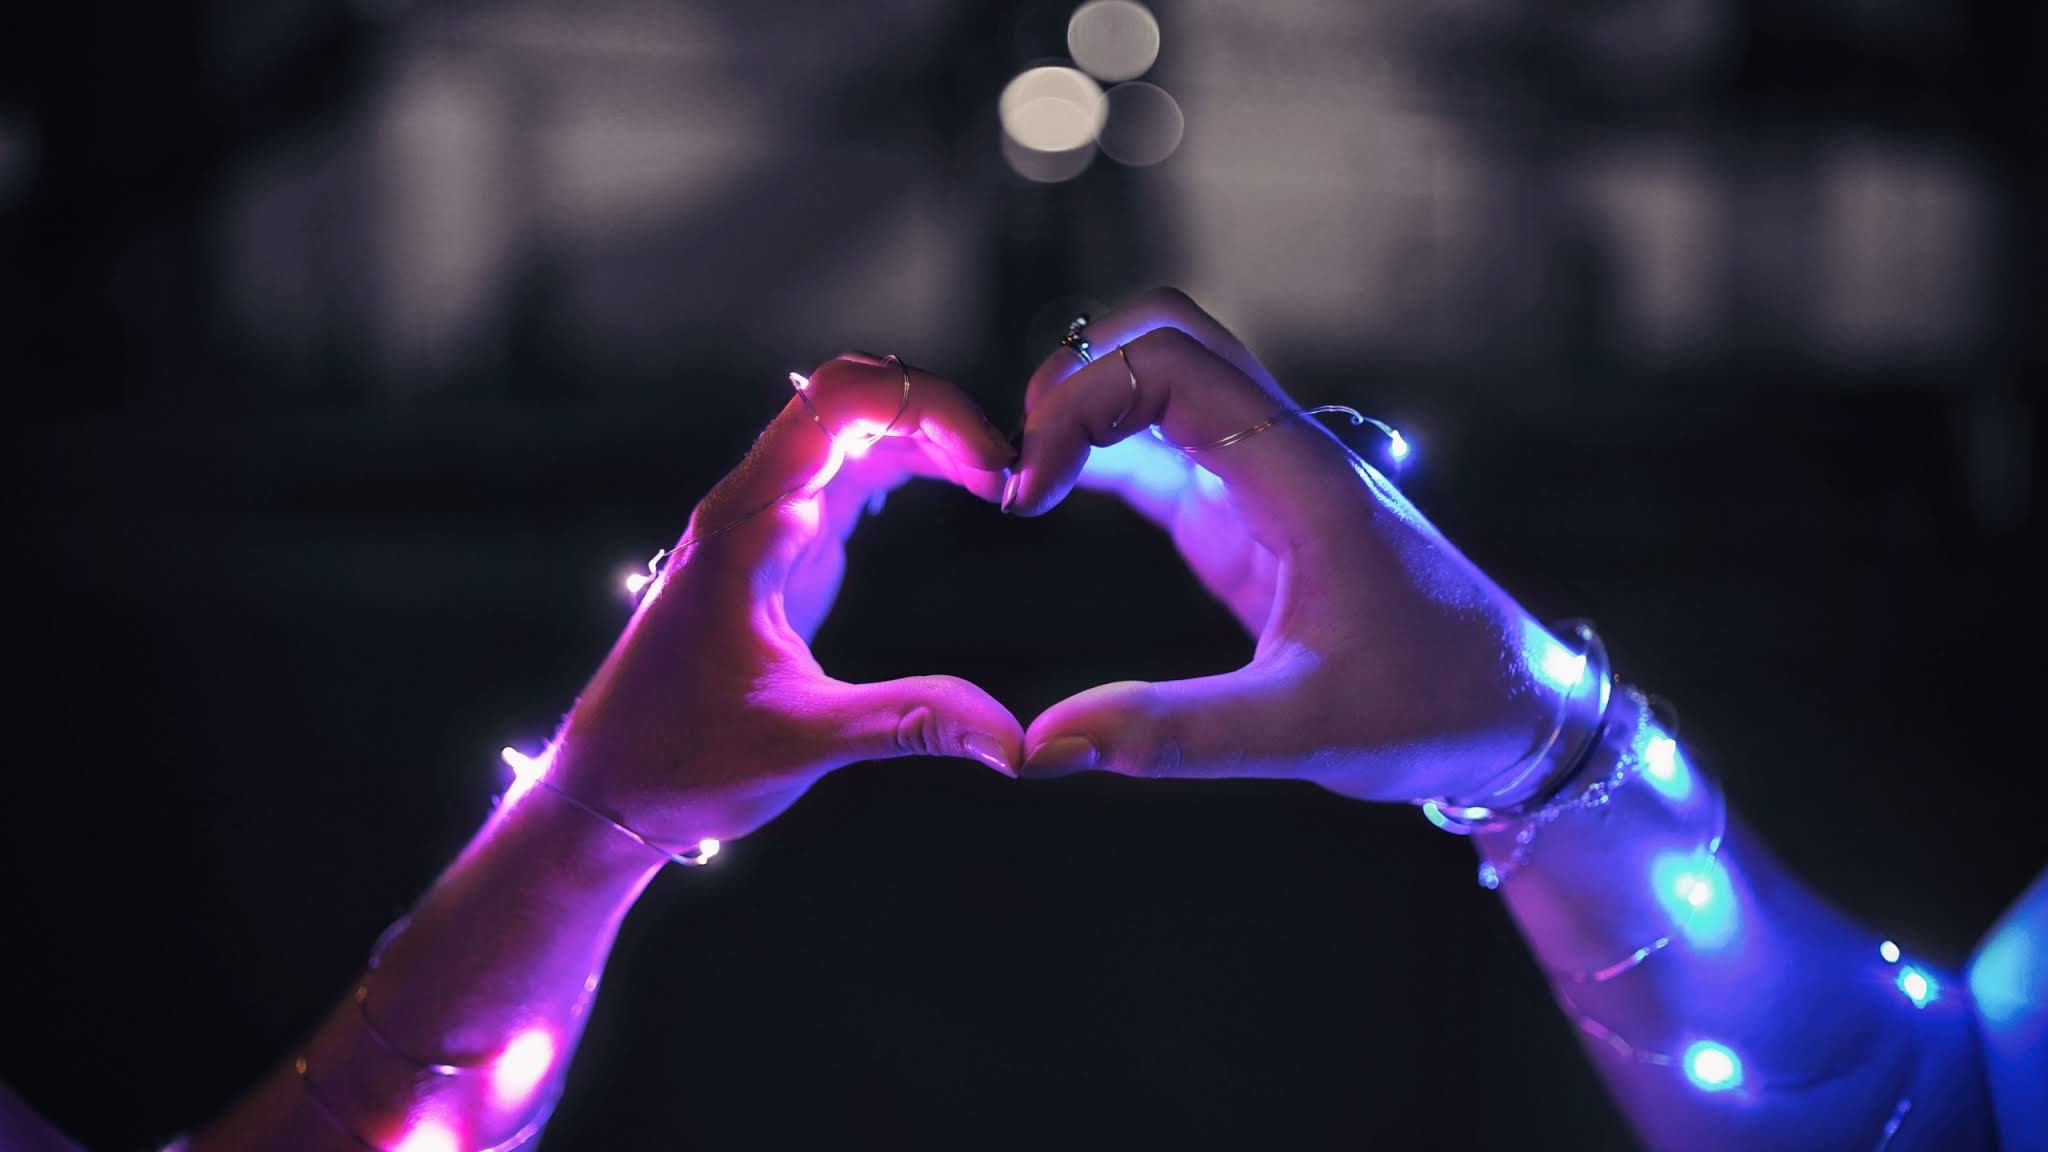 Love Heart Led Lights Hands - Cute Wallpapers For Chromebooks , HD Wallpaper & Backgrounds